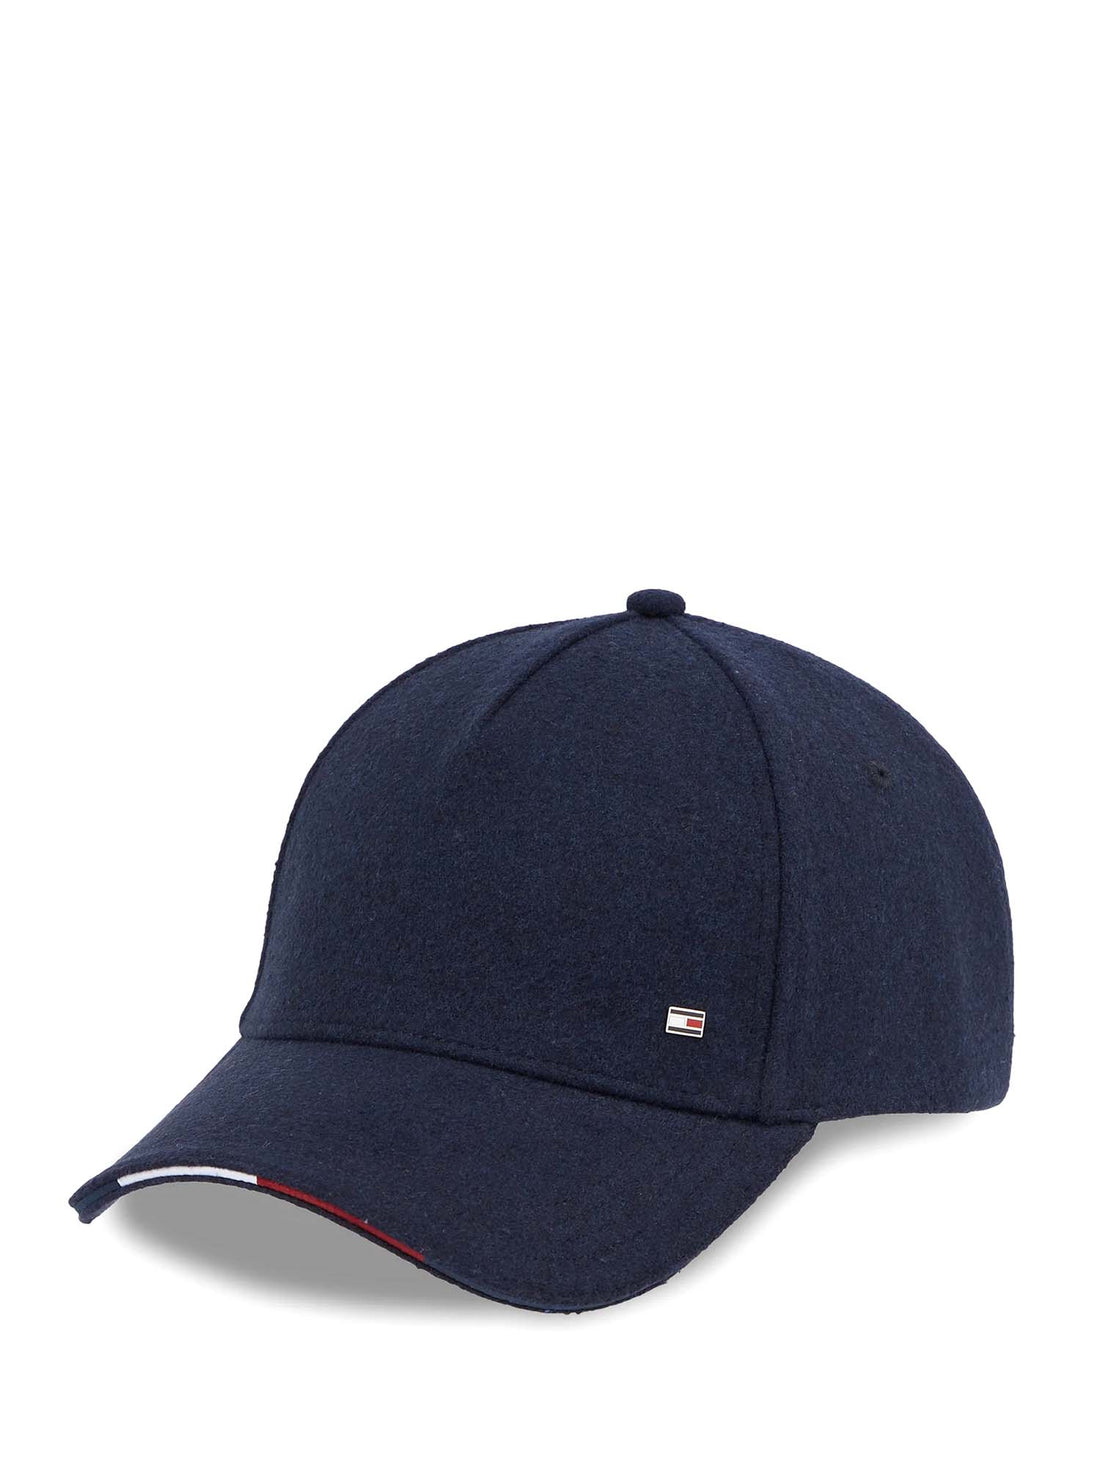 Cappelli Blu Tommy Jeans